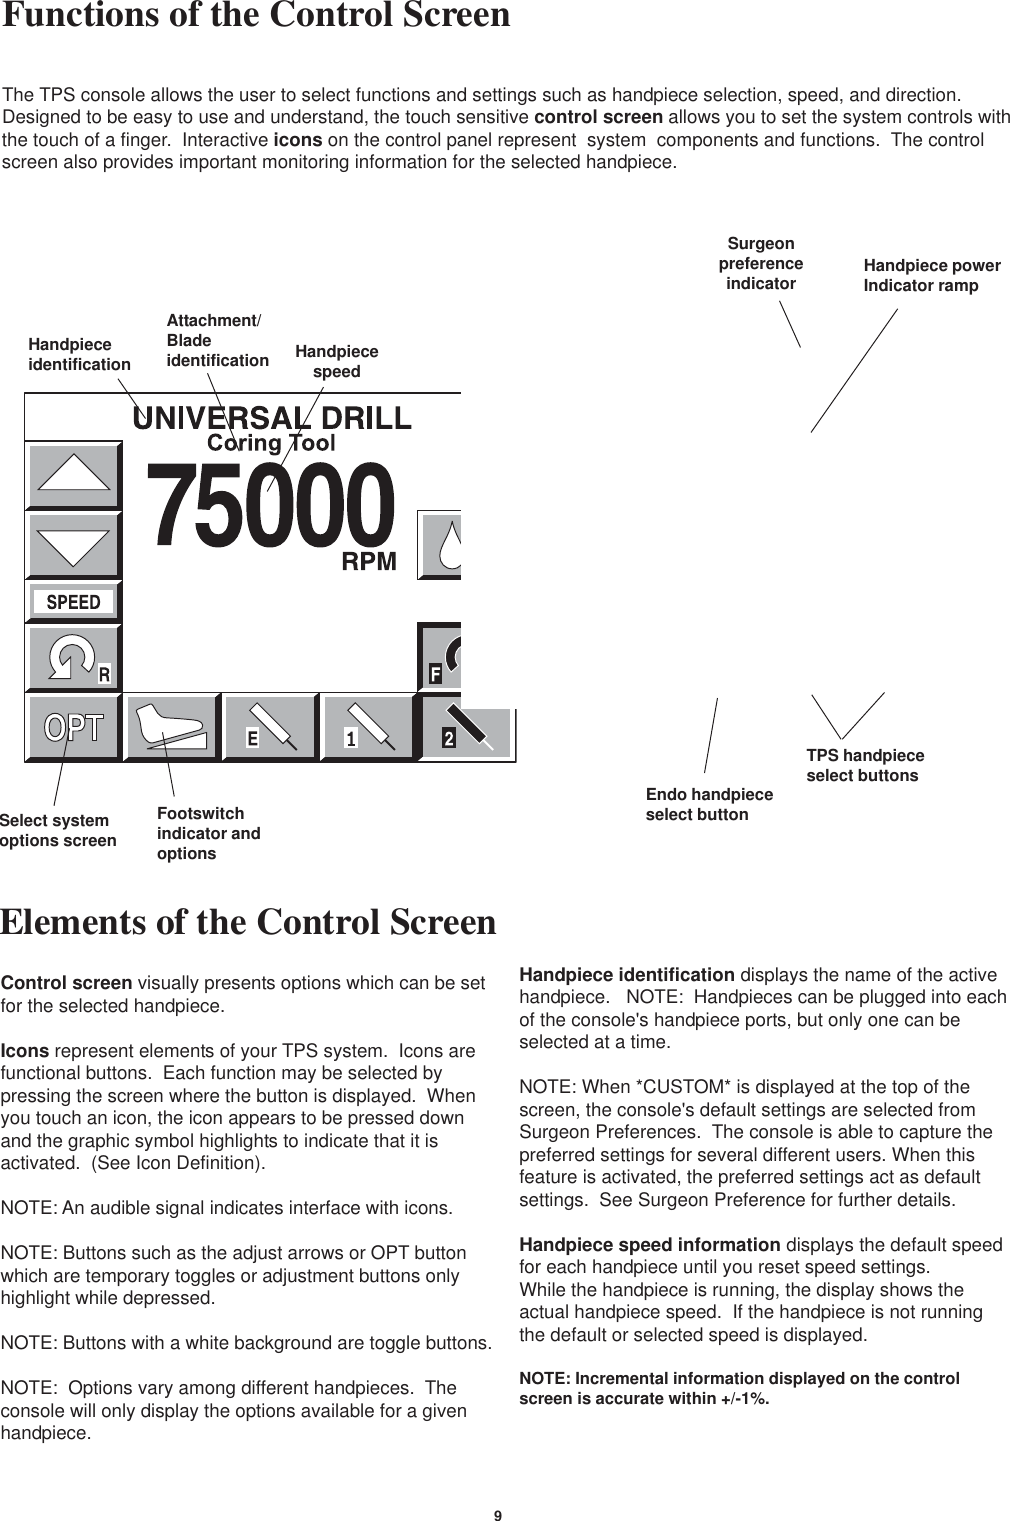 9Functions of the Control ScreenThe TPS console allows the user to select functions and settings such as handpiece selection, speed, and direction.Designed to be easy to use and understand, the touch sensitive control screen allows you to set the system controls withthe touch of a finger.  Interactive icons on the control panel represent  system  components and functions.  The controlscreen also provides important monitoring information for the selected handpiece.Select systemoptions screenFootswitchindicator andoptionsHandpieceidentification HandpiecespeedTPS handpieceselect buttonsEndo handpieceselect buttonElements of the Control ScreenAttachment/BladeidentificationHandpiece powerIndicator rampSurgeonpreferenceindicatorControl screen visually presents options which can be setfor the selected handpiece.Icons represent elements of your TPS system.  Icons arefunctional buttons.  Each function may be selected bypressing the screen where the button is displayed.  Whenyou touch an icon, the icon appears to be pressed downand the graphic symbol highlights to indicate that it isactivated.  (See Icon Definition).NOTE: An audible signal indicates interface with icons.NOTE: Buttons such as the adjust arrows or OPT buttonwhich are temporary toggles or adjustment buttons onlyhighlight while depressed.NOTE: Buttons with a white background are toggle buttons.NOTE:  Options vary among different handpieces.  Theconsole will only display the options available for a givenhandpiece.Handpiece identification displays the name of the activehandpiece.   NOTE:  Handpieces can be plugged into eachof the console&apos;s handpiece ports, but only one can beselected at a time.NOTE: When *CUSTOM* is displayed at the top of thescreen, the console&apos;s default settings are selected fromSurgeon Preferences.  The console is able to capture thepreferred settings for several different users. When thisfeature is activated, the preferred settings act as defaultsettings.  See Surgeon Preference for further details.Handpiece speed information displays the default speedfor each handpiece until you reset speed settings.While the handpiece is running, the display shows theactual handpiece speed.  If the handpiece is not runningthe default or selected speed is displayed.NOTE: Incremental information displayed on the controlscreen is accurate within +/-1%.